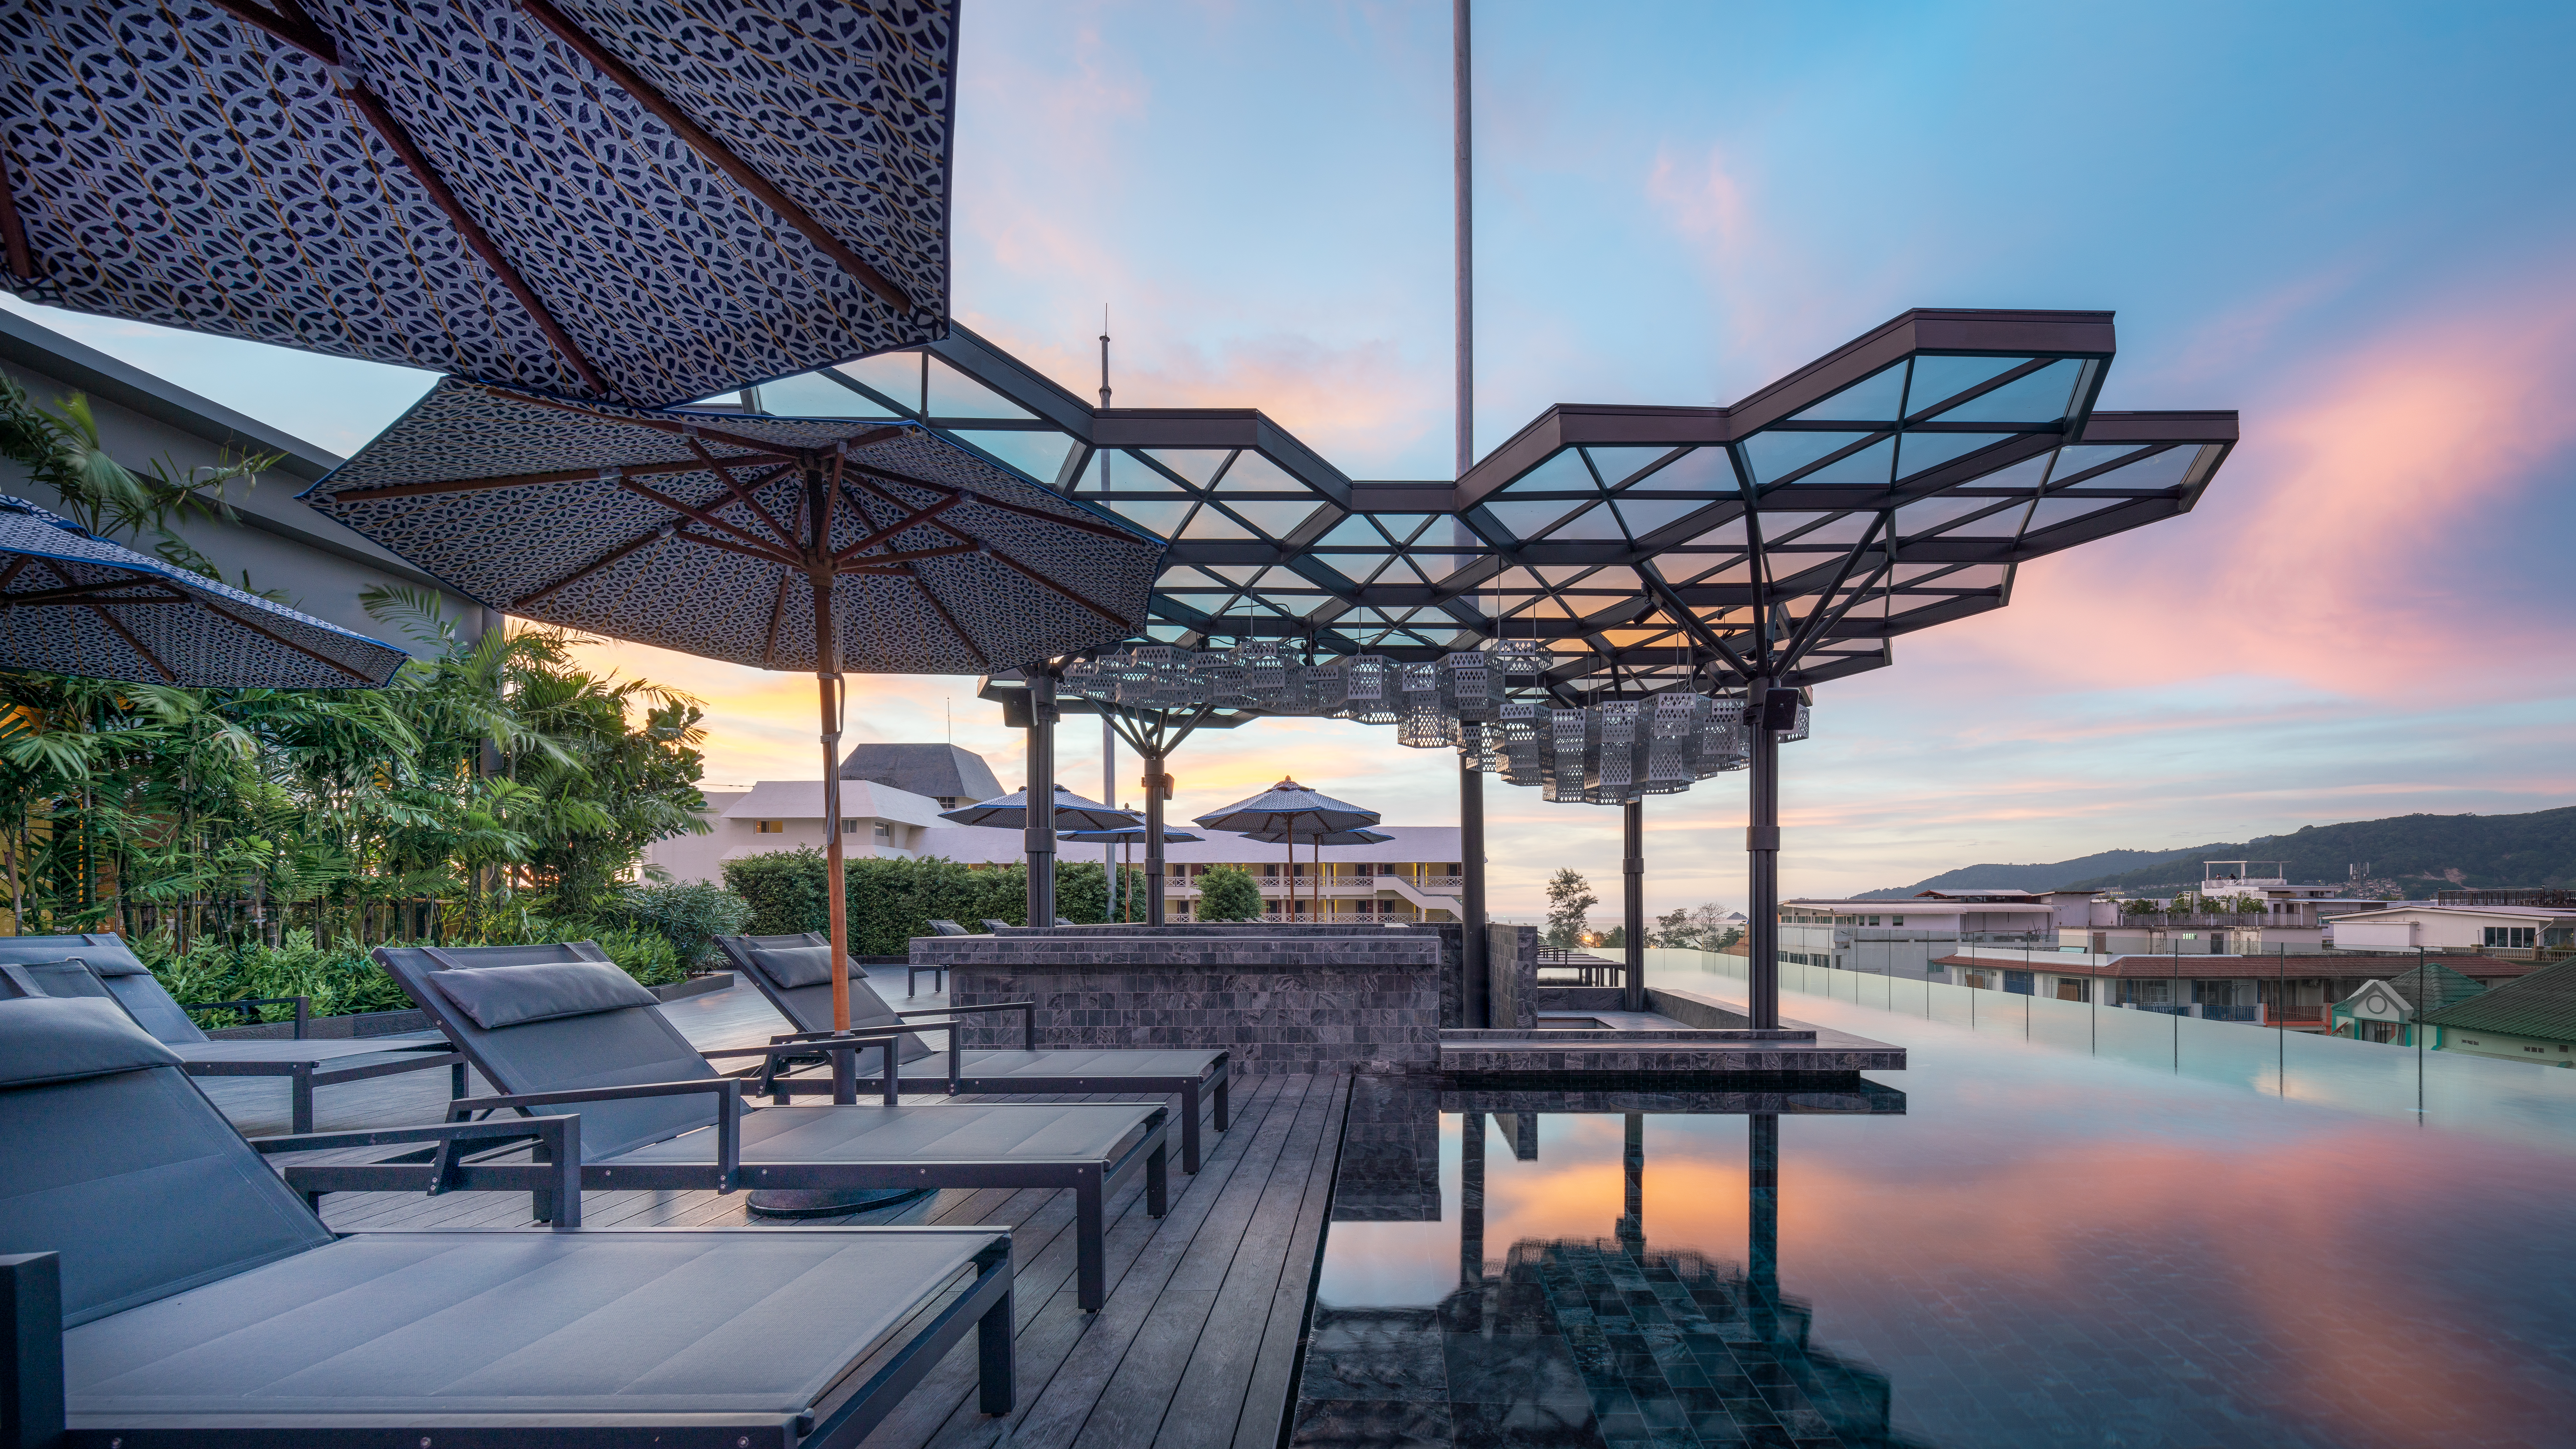 <p>Turn the romance up to 11 and enjoy views over Patong Beach at this boutique Phuket hotel </s>